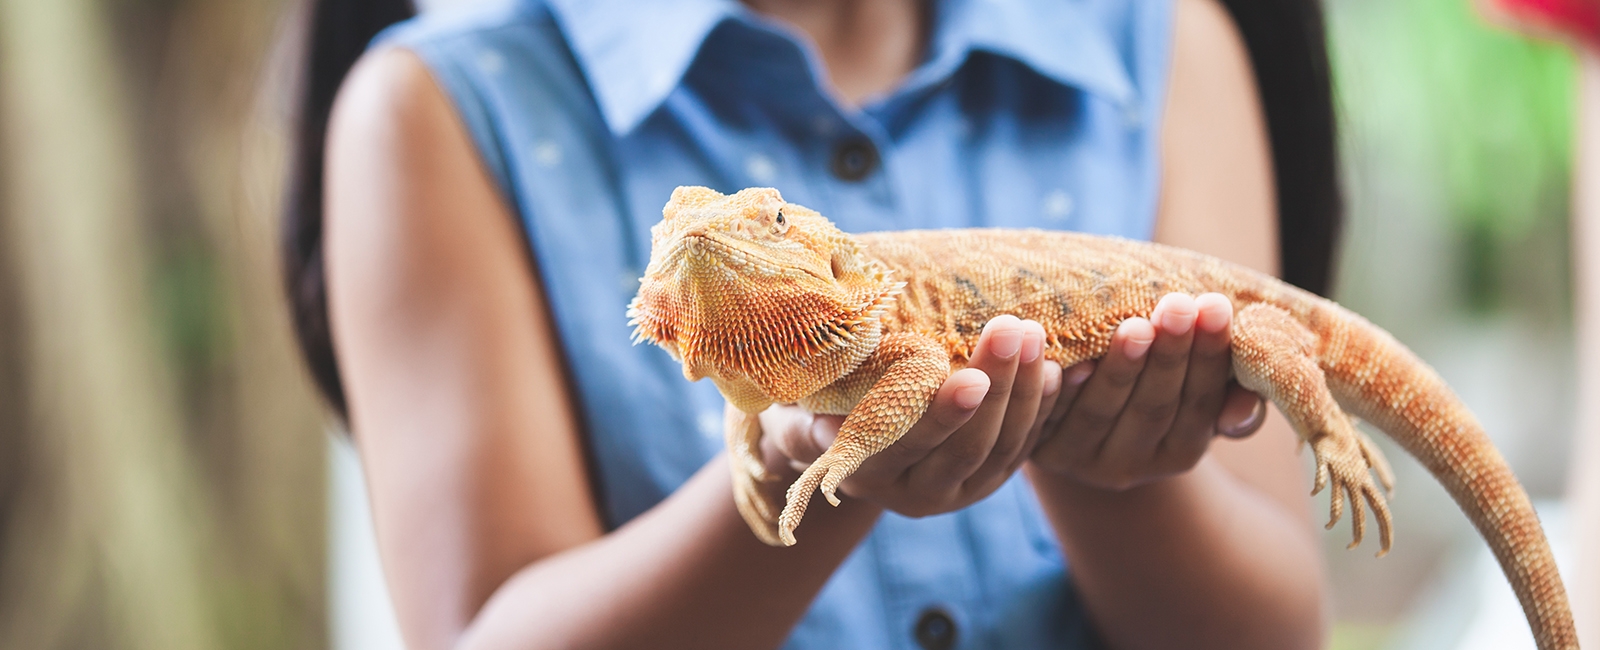 Apply to keep reptiles, amphibians, invertebrates and other exotic pets